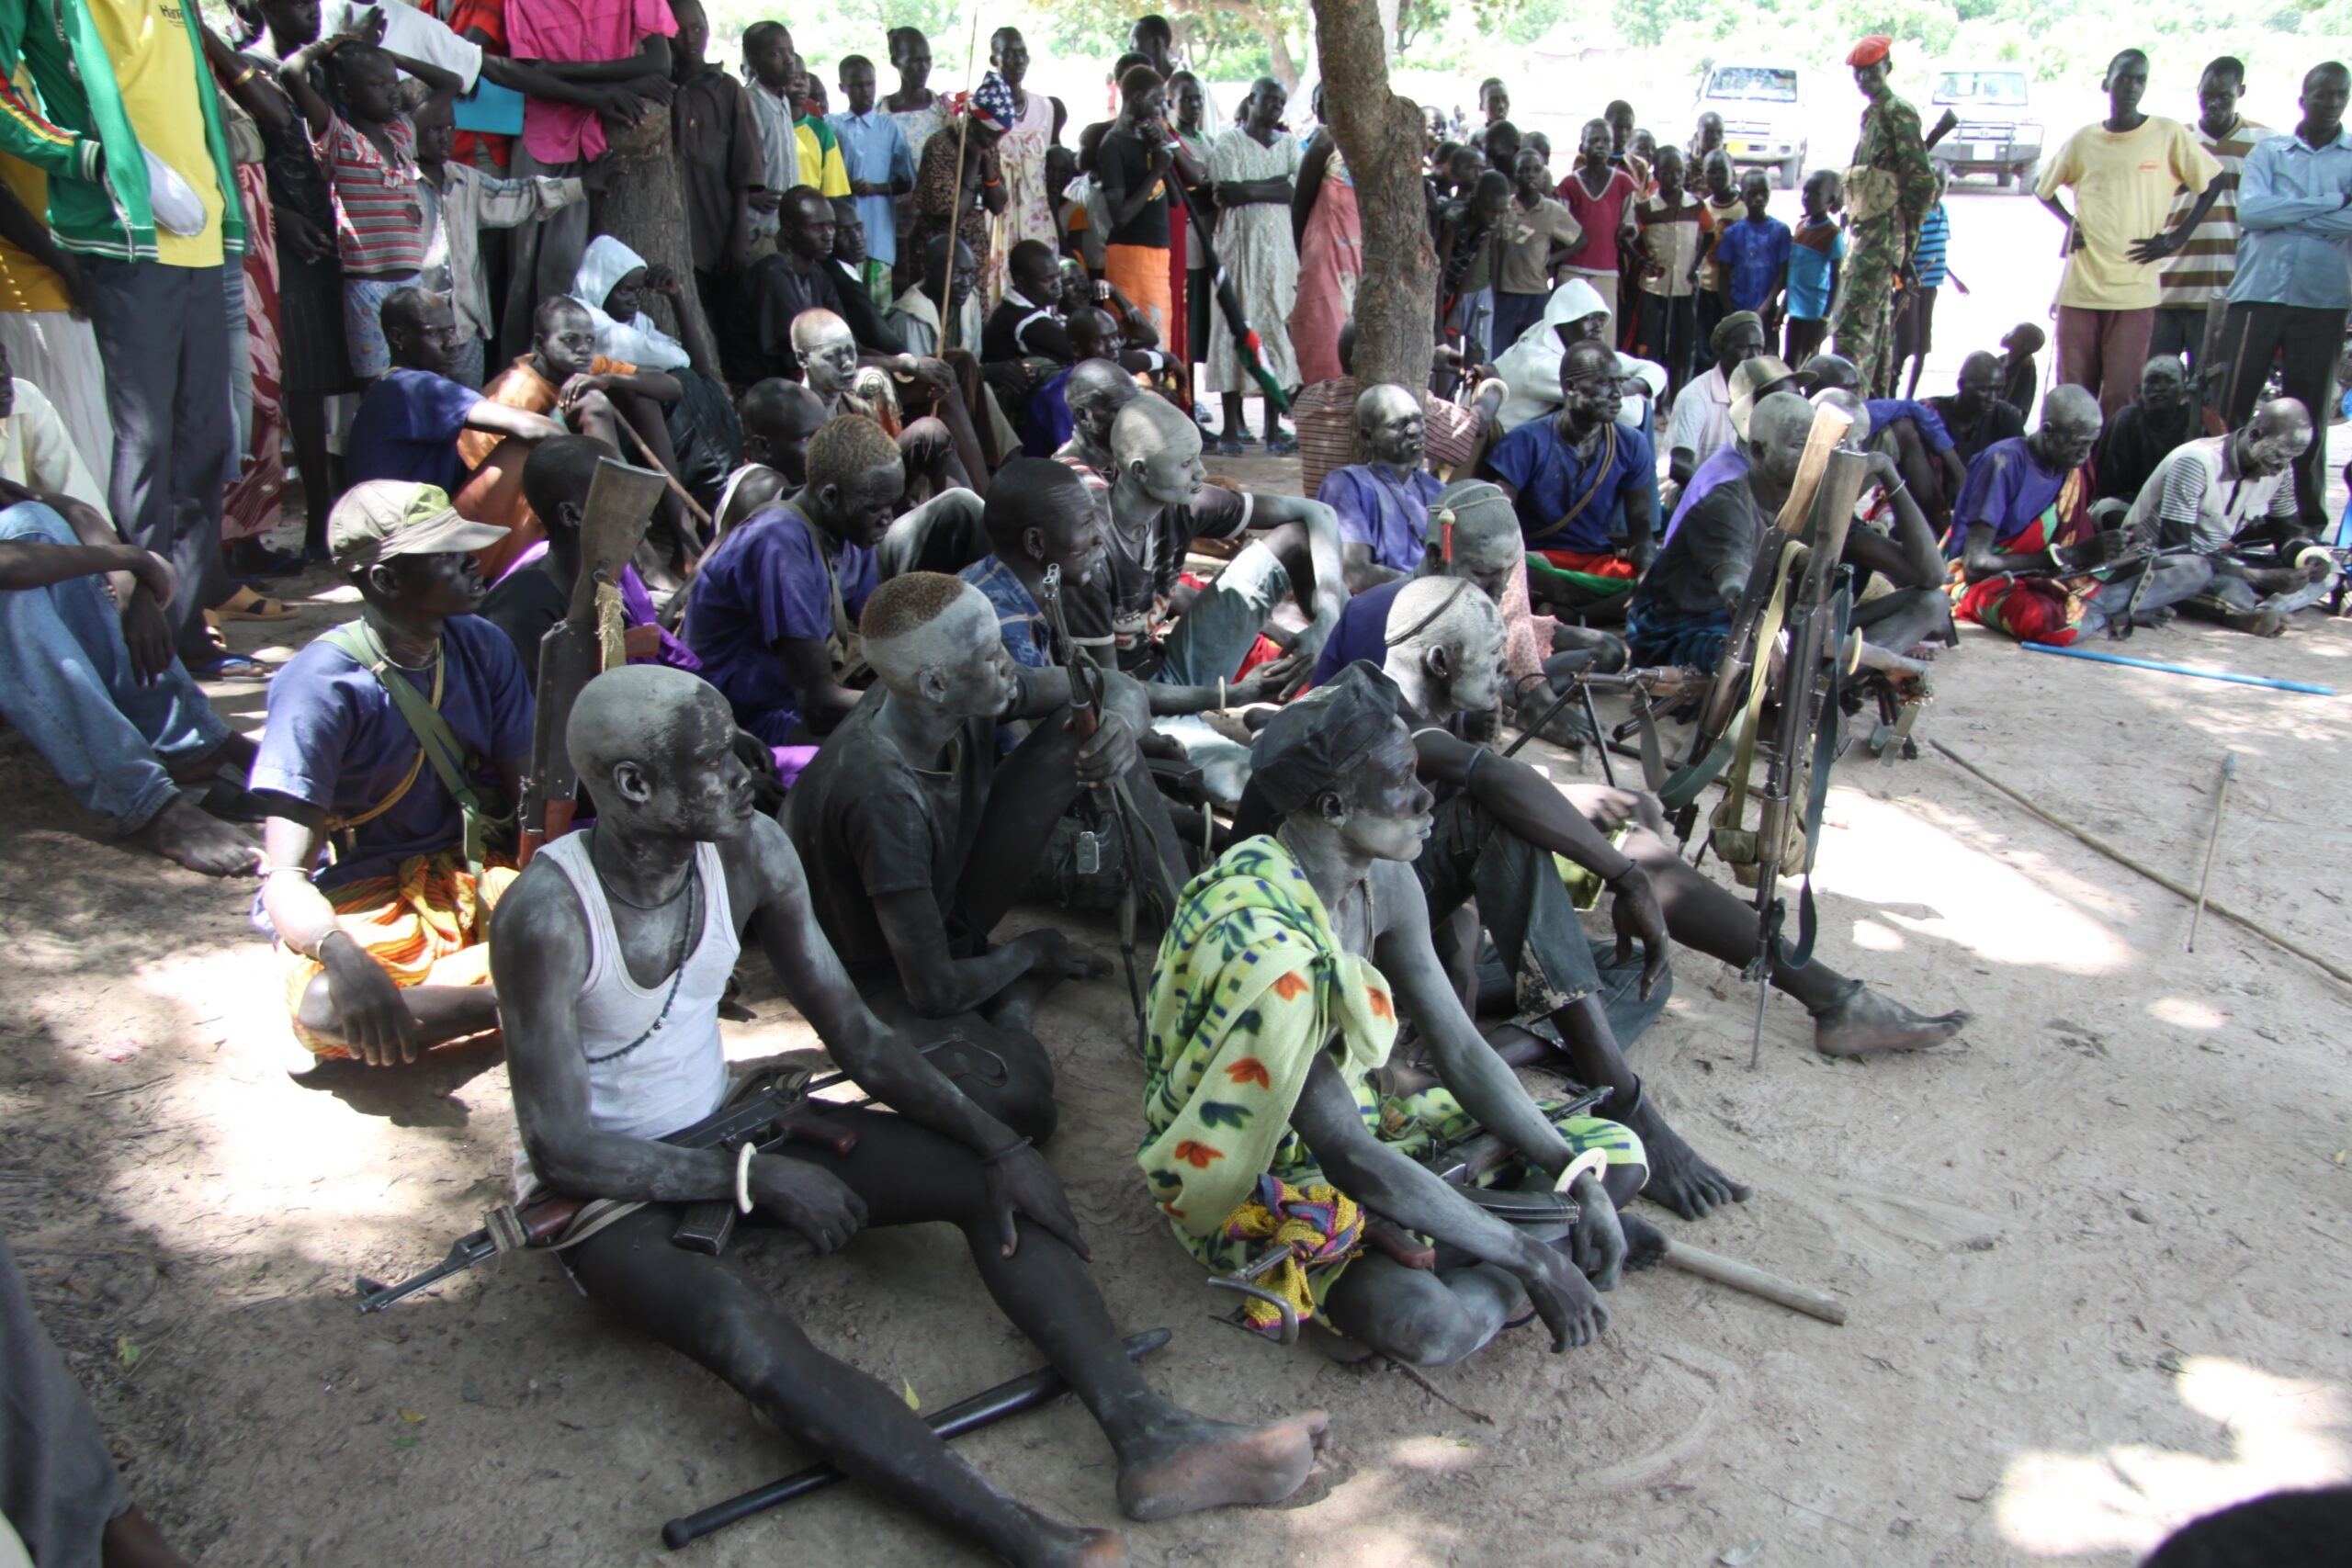 gelweng_youth_lining_up_in_jier_payam_of_rumbek_central_to_handover_their_guns_to_spla_forces_photo_taken_on_8.09.2011_.jpg